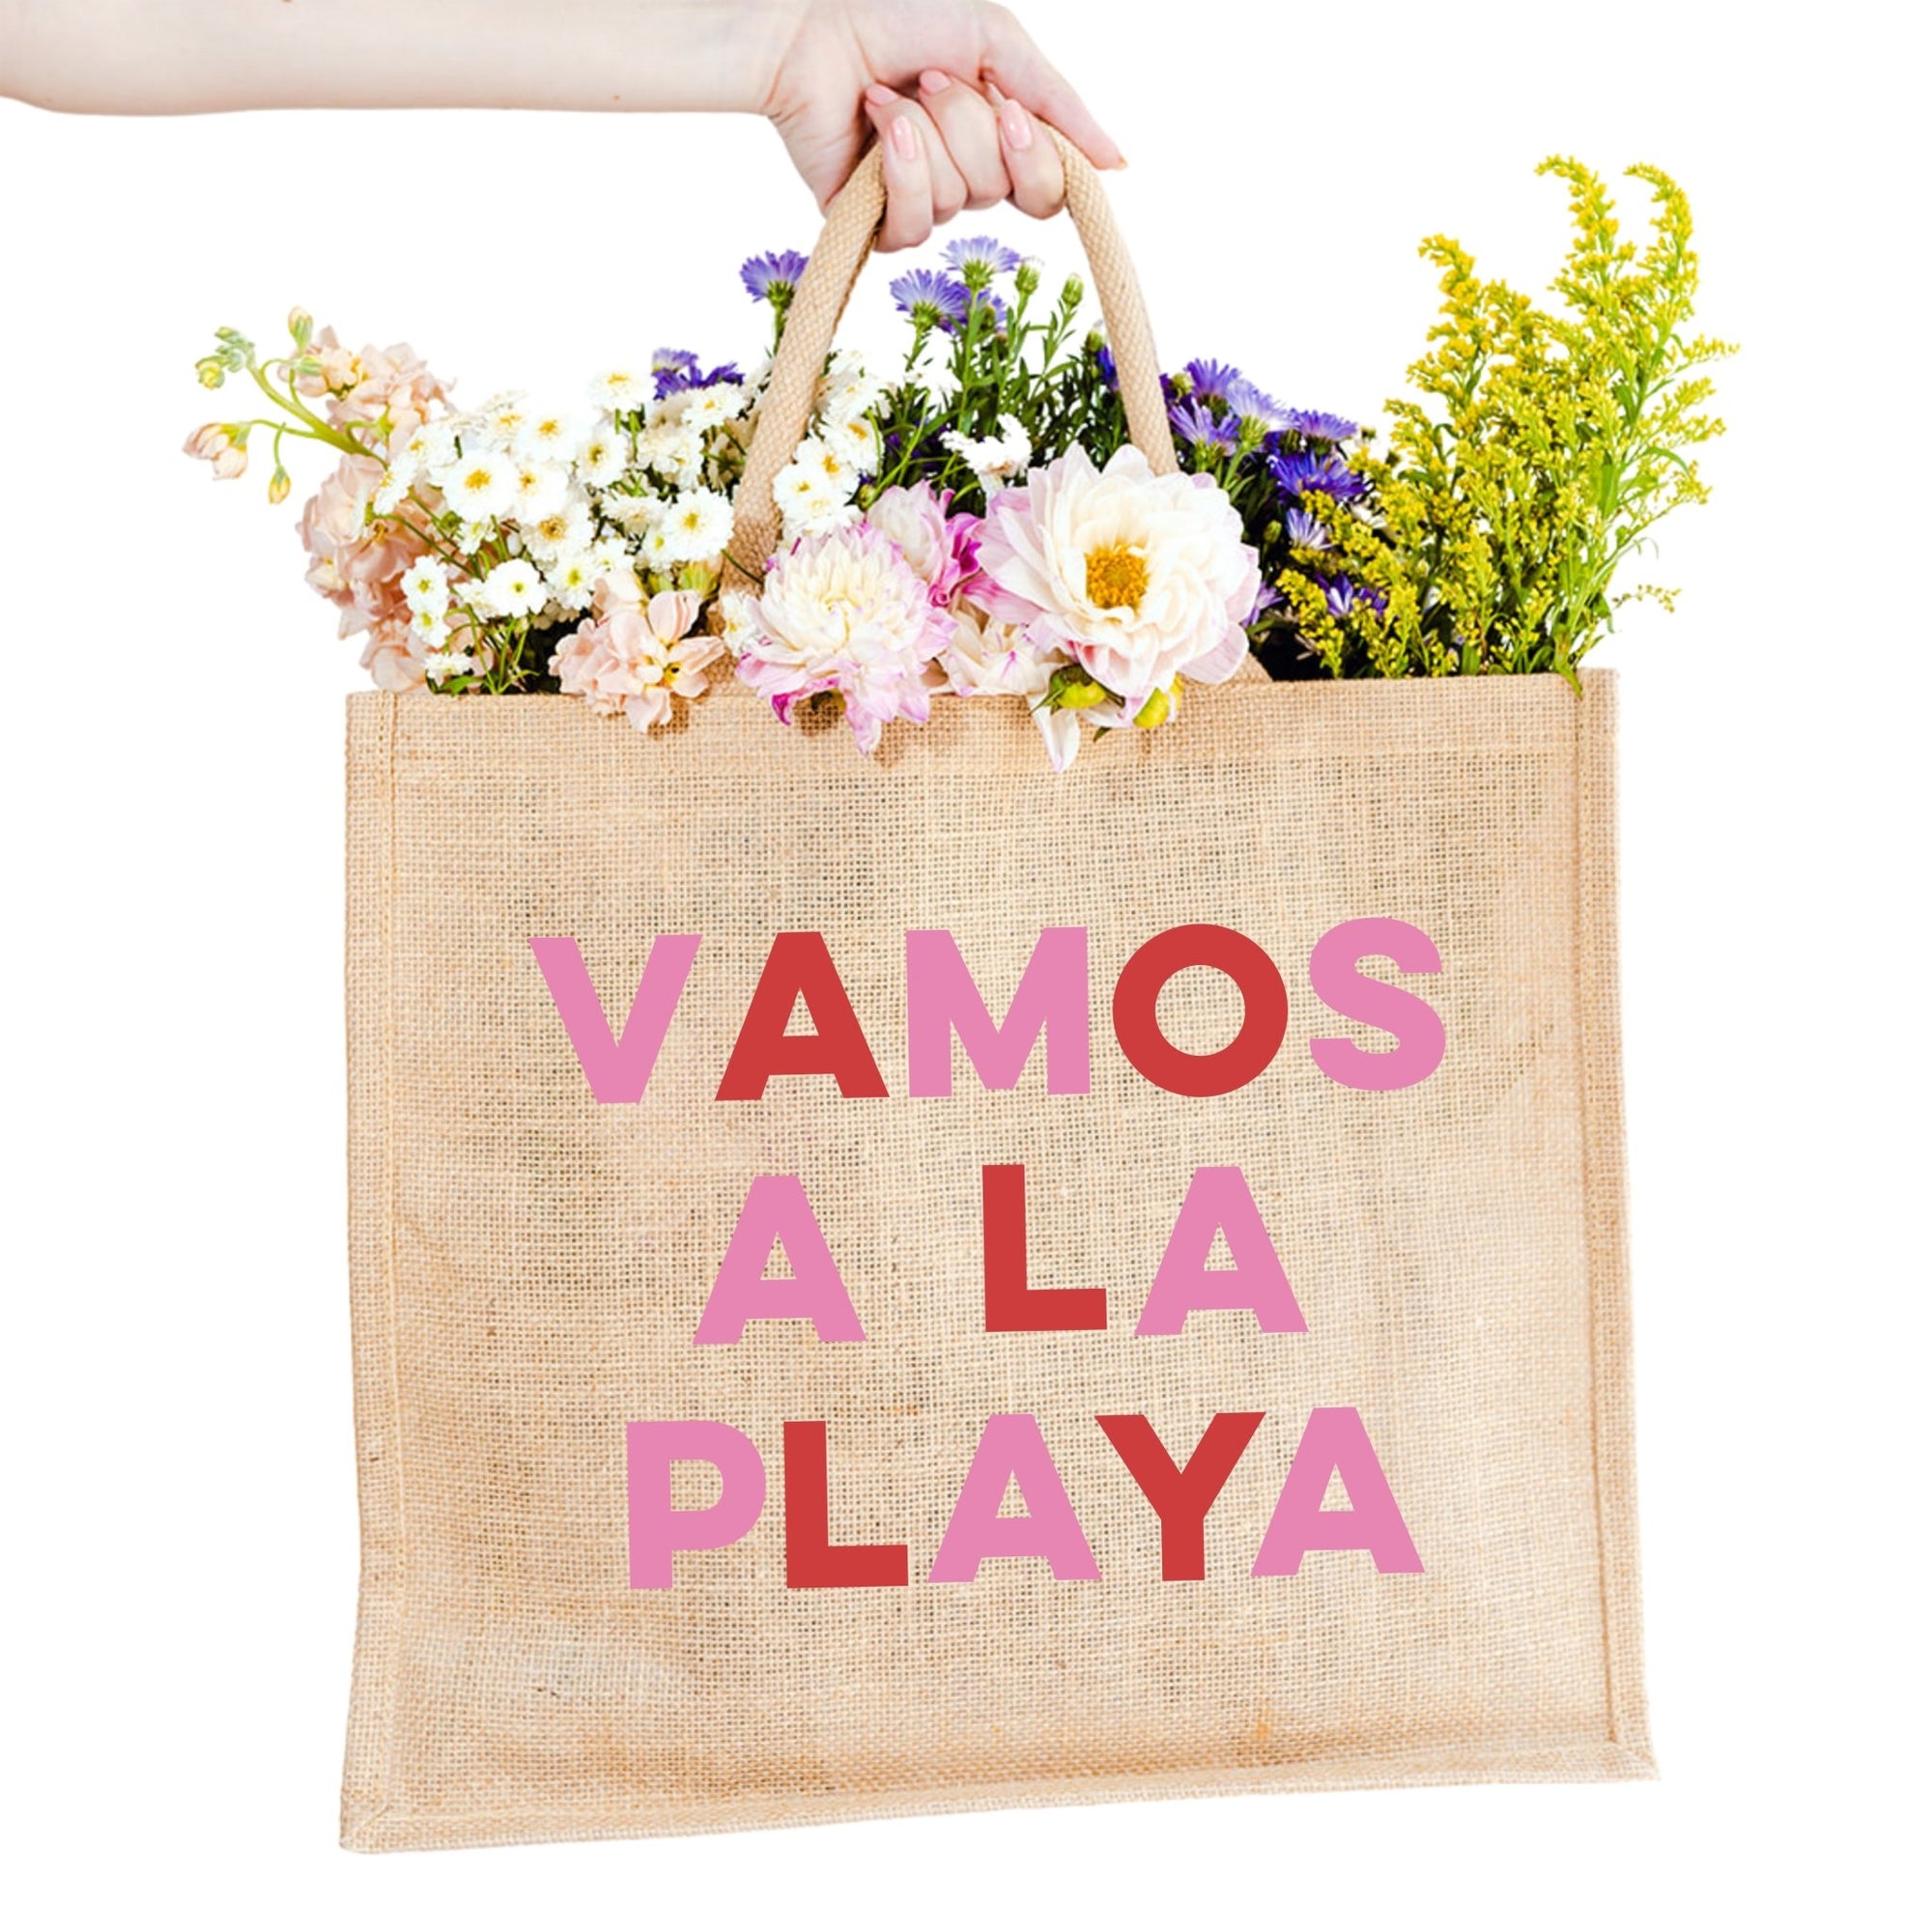 A jute tote reads "VAMOS A LA PLAYA" across the front in red and pink letters